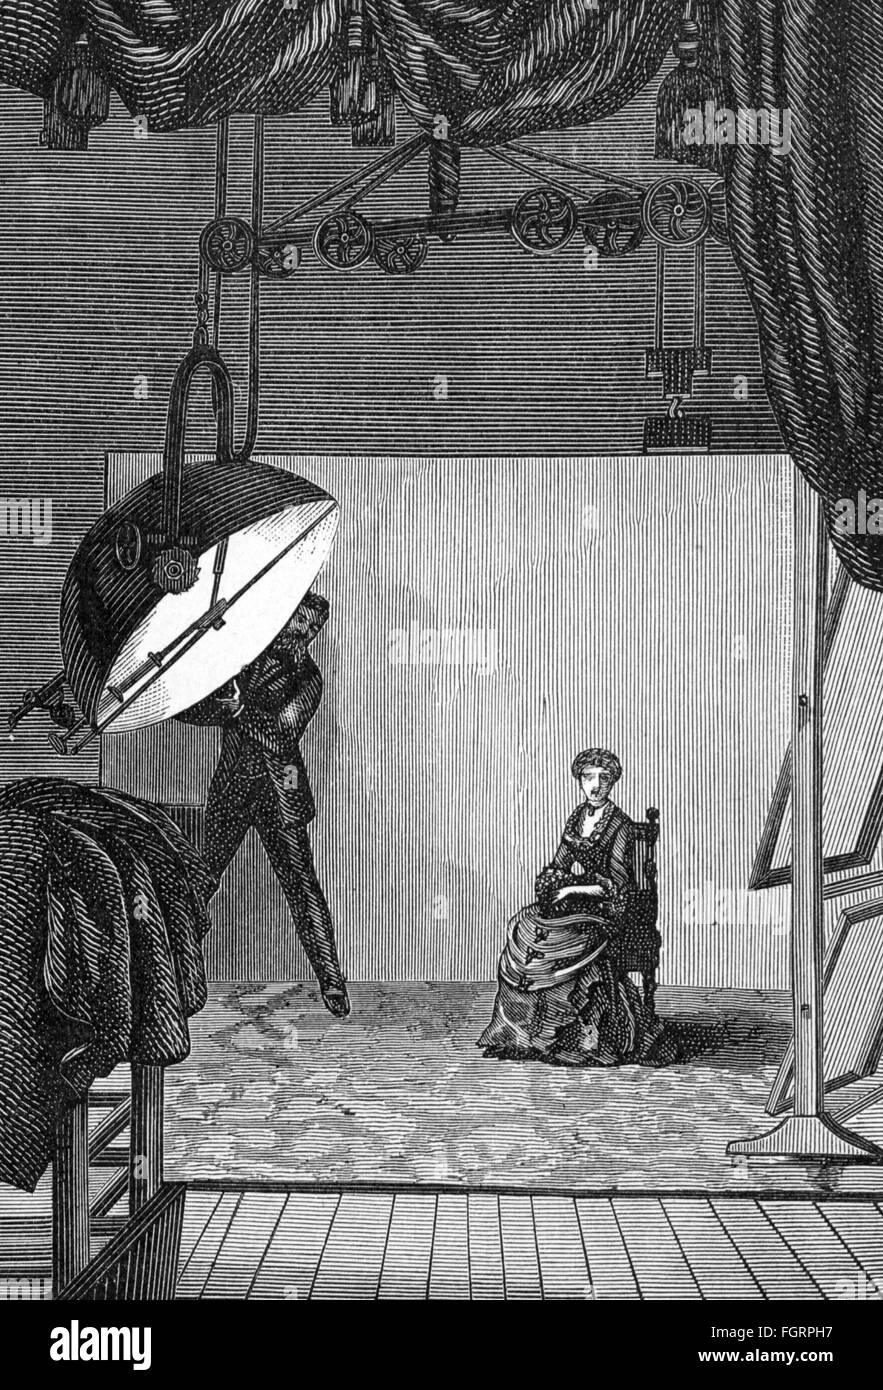 photography,studios,photographing under electrical light,wood engraving,19th century,19th century,graphic,graphics,photographer's studio,photographer's salon,photographic studio,lights,lightness,illumination,illuminations,electricity,electrical,electric,background,backgrounds,photographer,photographers,standing,sitting,sit,photo camera,camera,cameras,lamp,lamps,luminary,luminaries,illuminants,illuminant,source of light,sources of light,studio,atelier,artist's workroom,ateliers,artist's workrooms,studios,photograph,phot,Additional-Rights-Clearences-Not Available Stock Photo